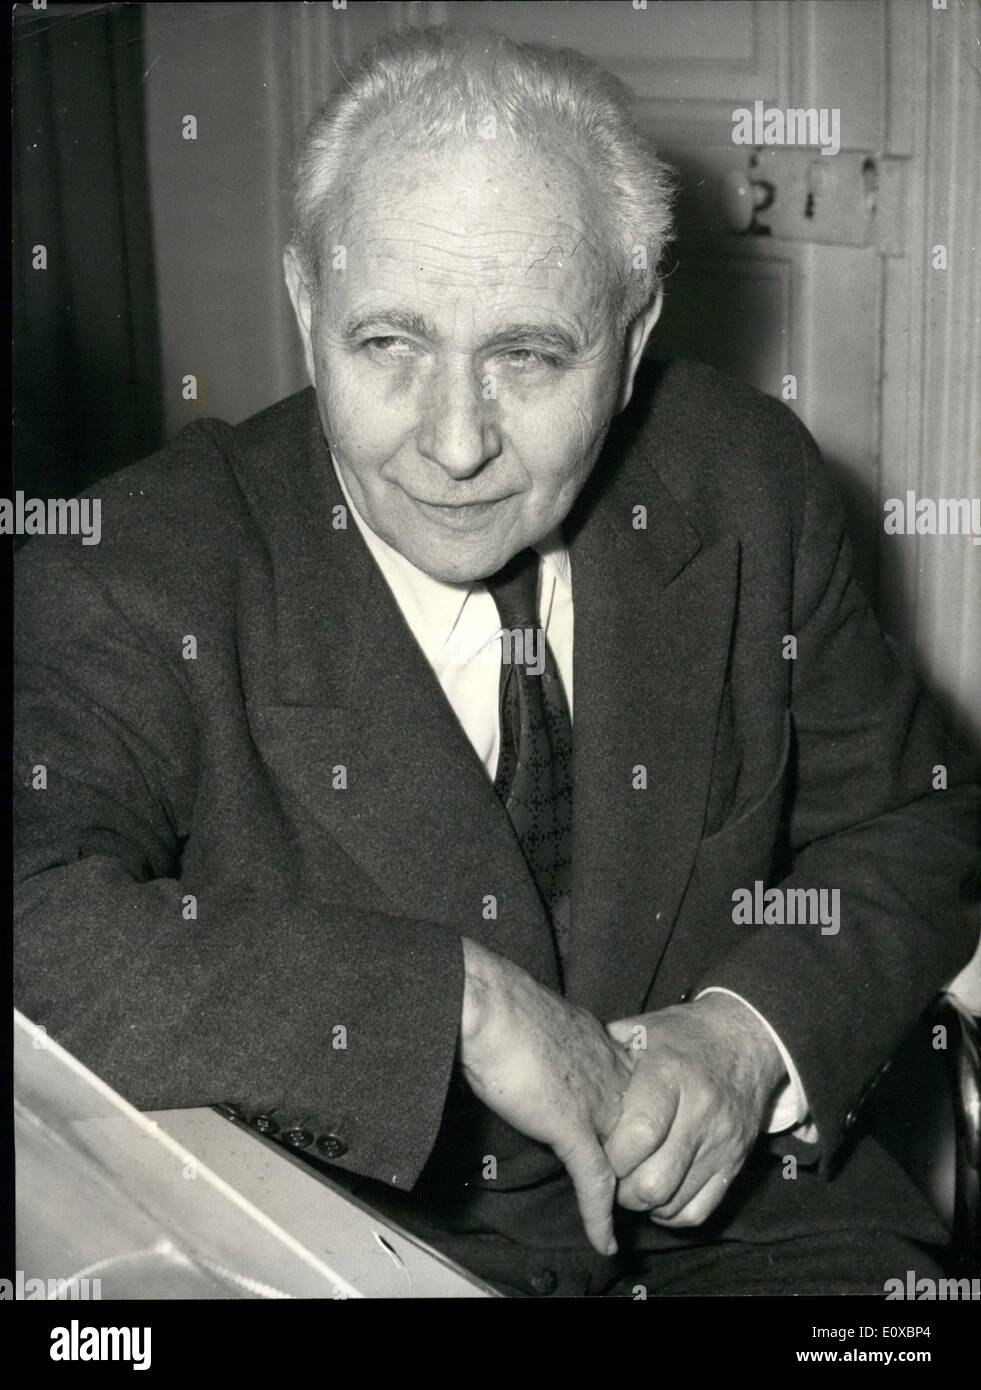 Feb. 02, 1966 - Louis Aragon one of France greatest living poets and excellent writer in an article published in the Paris communist daily paper strongly critised the trial of the two russian writers which took place now in Moscou. This crtisisme coming from an important member of the french communist party created a sensation world over. Stock Photo